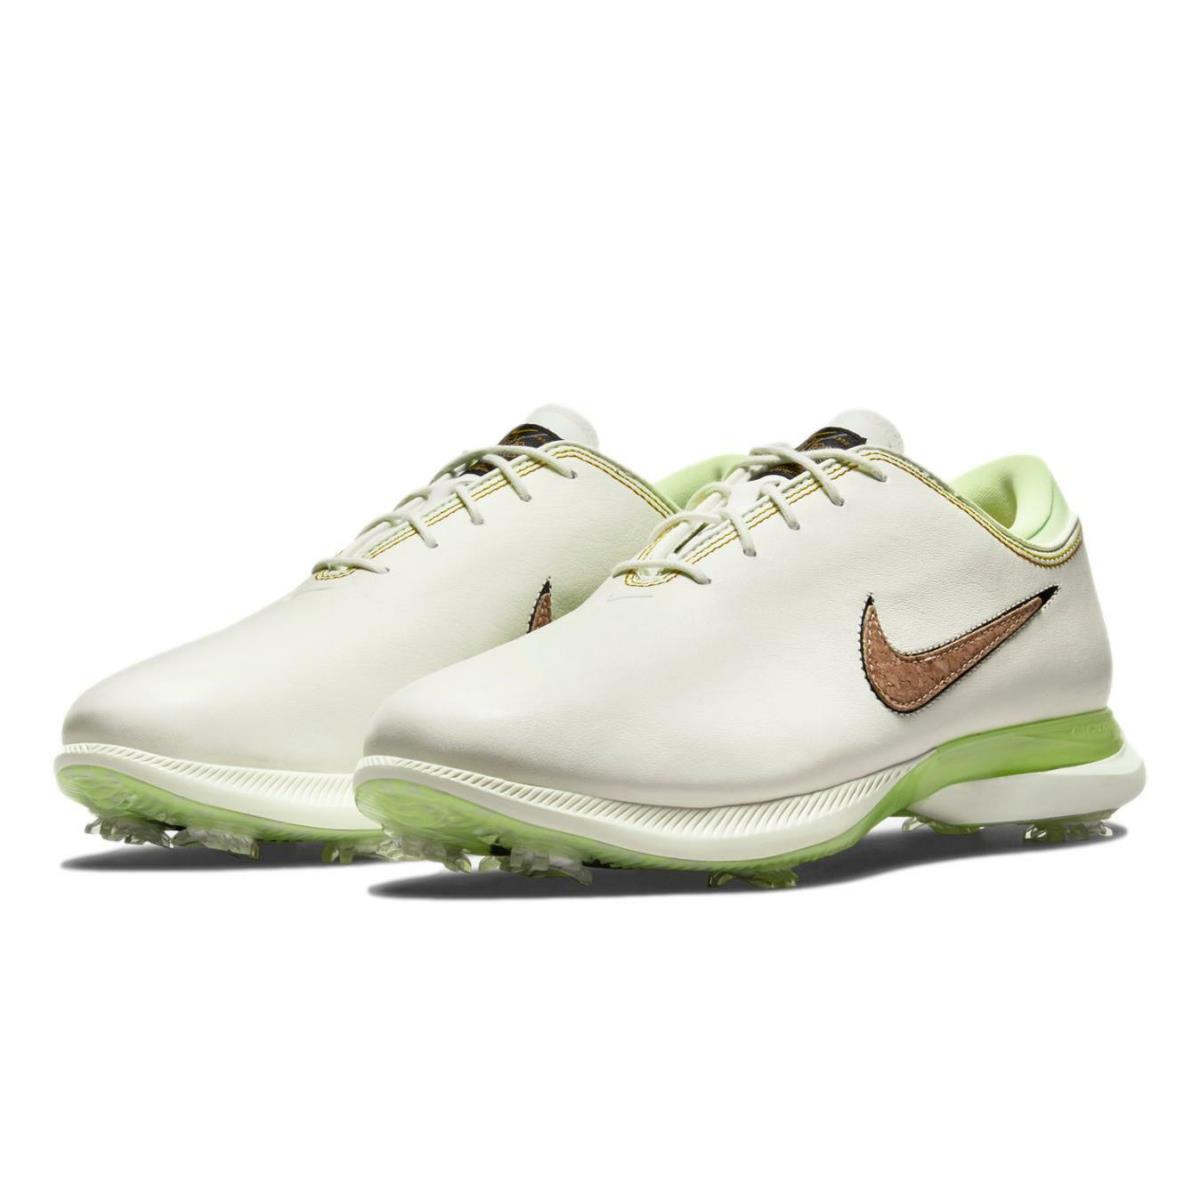 Nike Air Zoom Victory Tour Nrg 2 `cork` Golf Shoes Cleats DB4543-100 - White